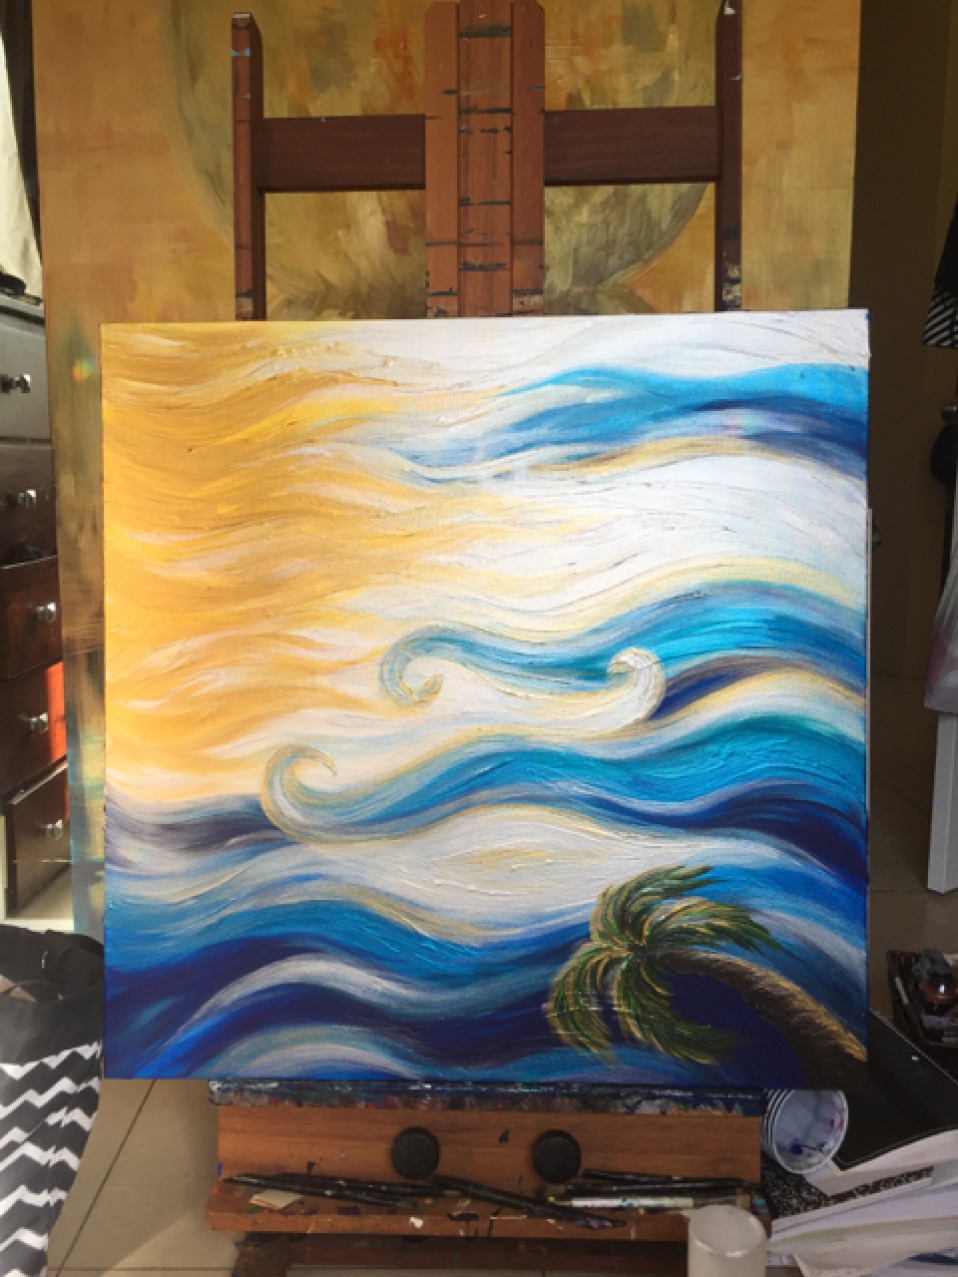 Commissioned to Recreate the Sun & Wind Painting on a Smaller Scale